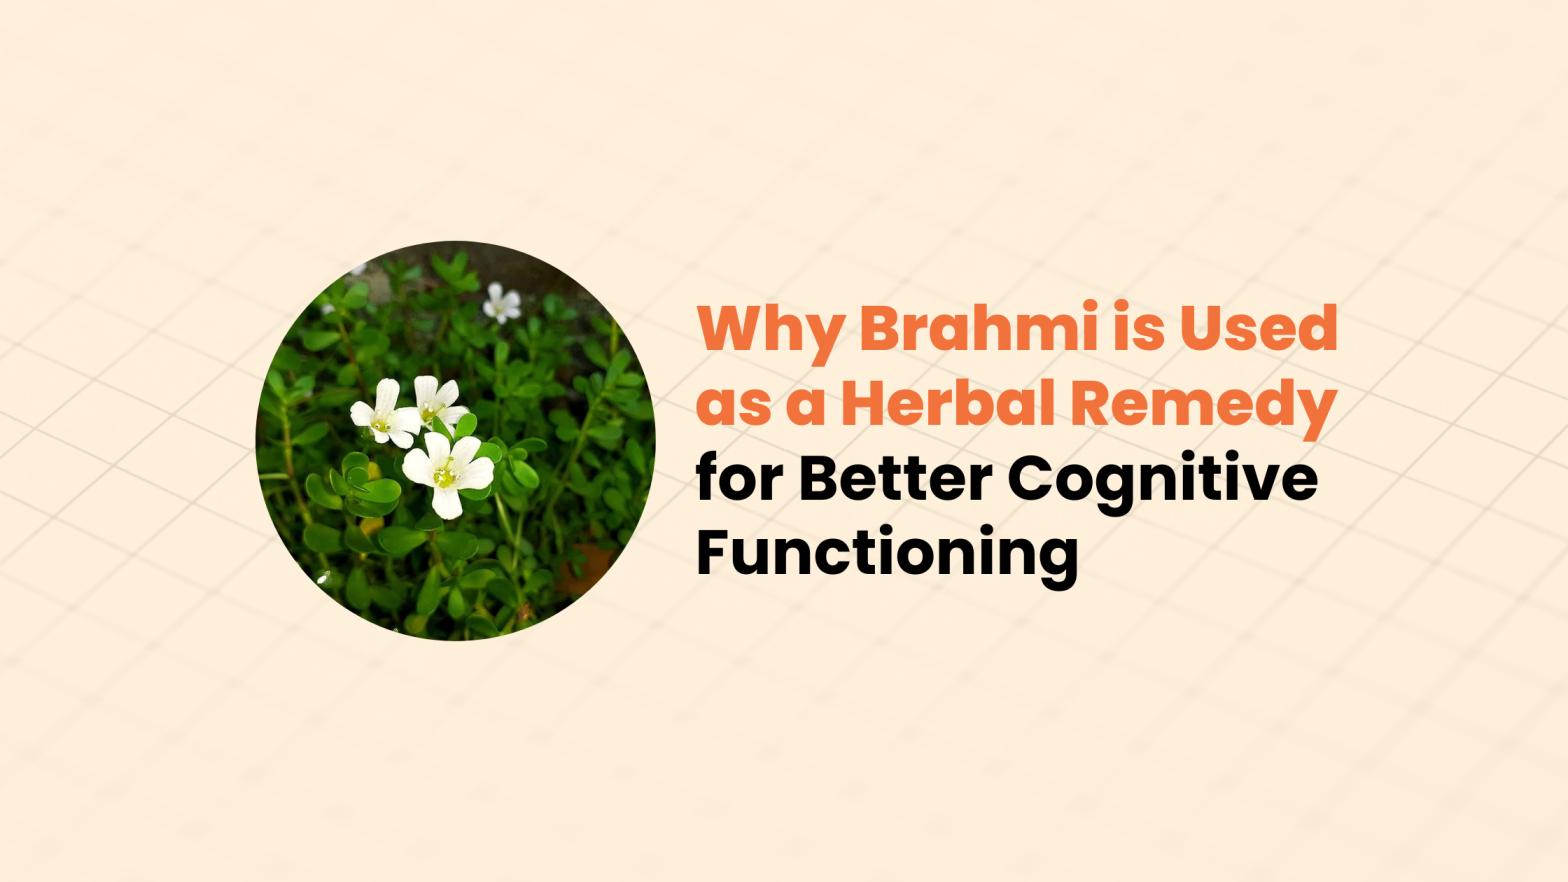 Why Brahmi is Used as a Herbal Remedy  (1)